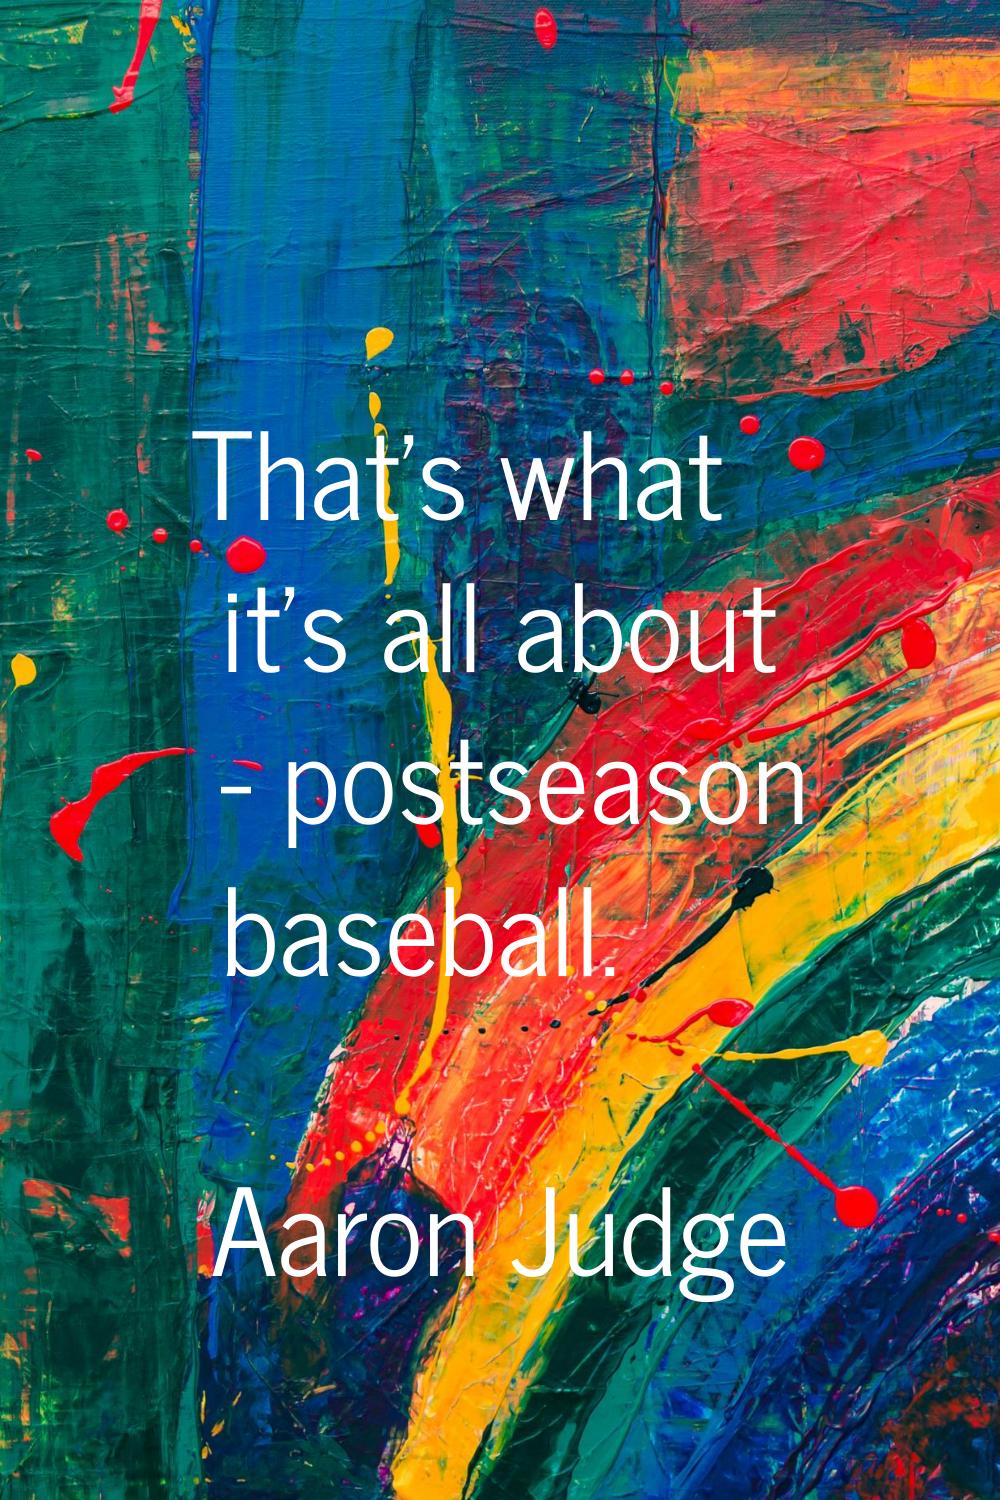 That's what it's all about - postseason baseball.